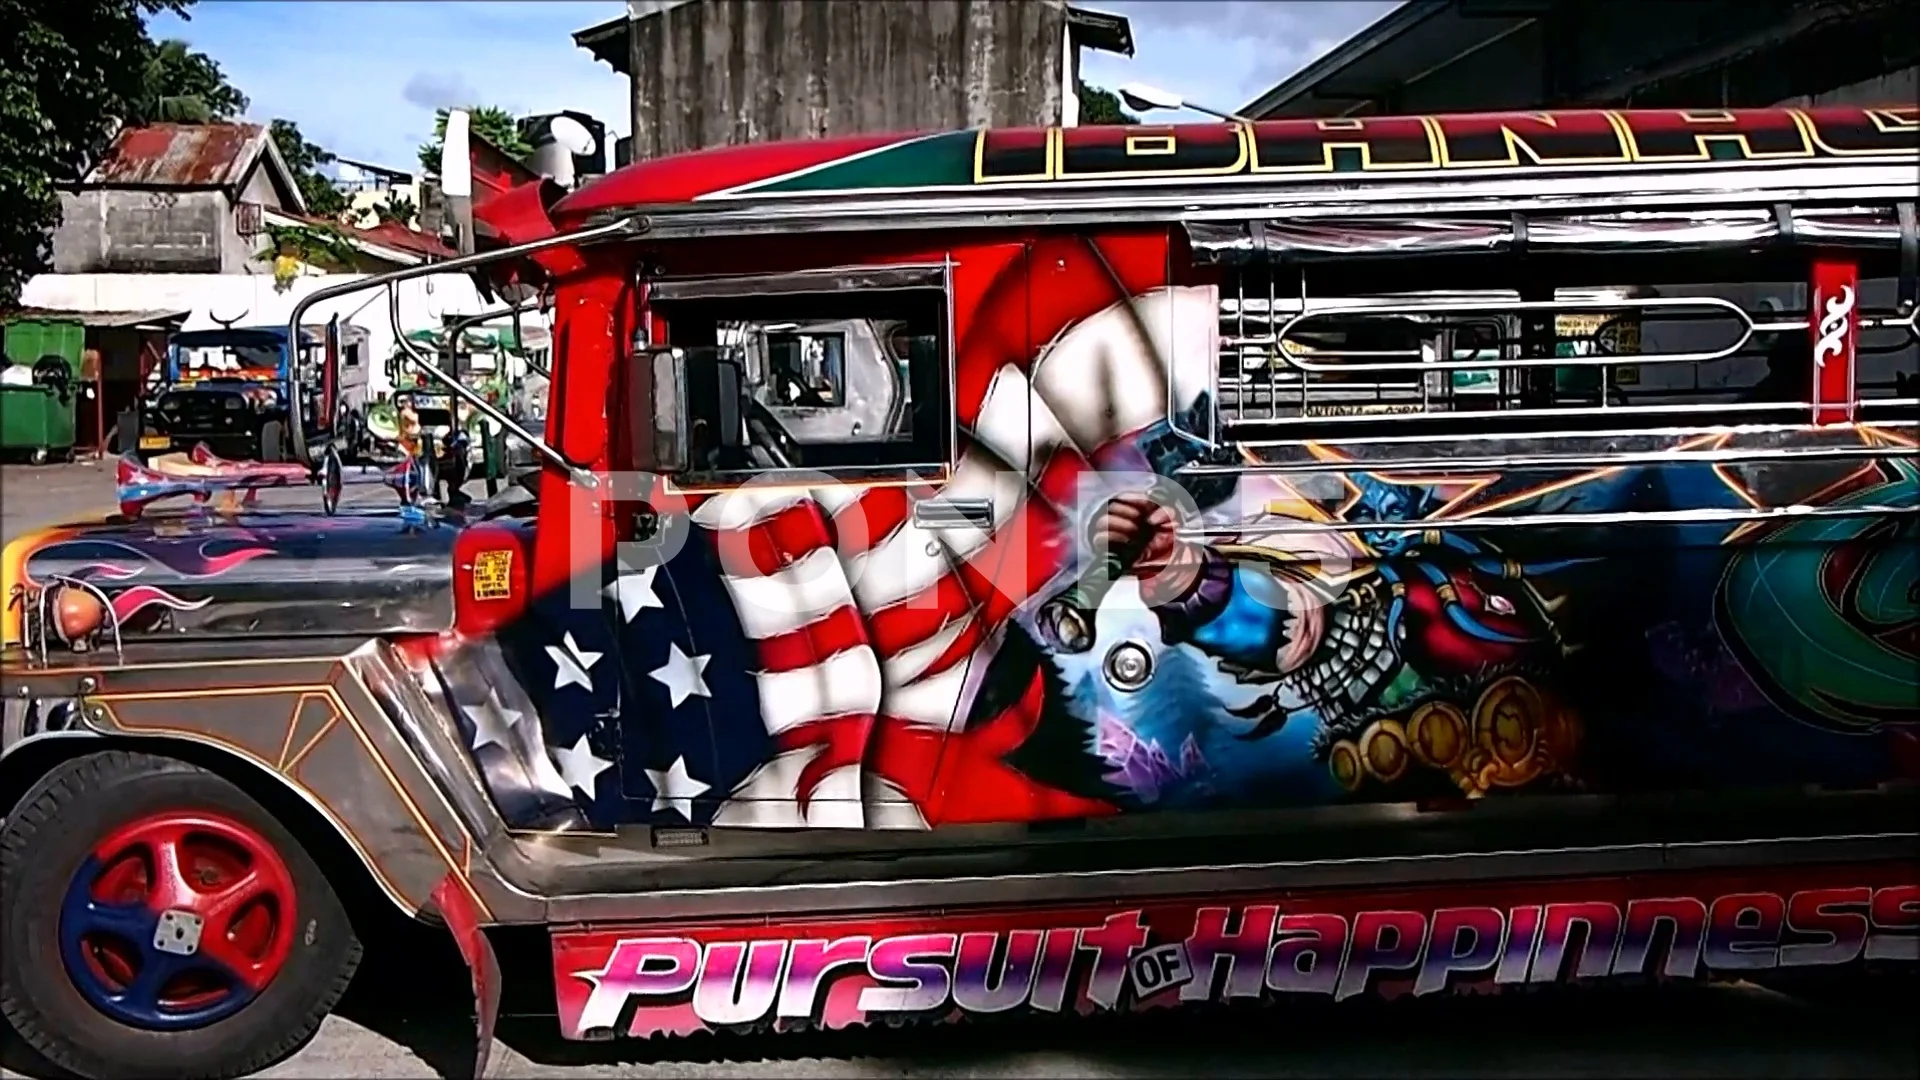 WELCOME TO PLANET PUTO!!!! — DAT PEELING WEN UR RIDING IN A JEEP AND PIPOL  WID...